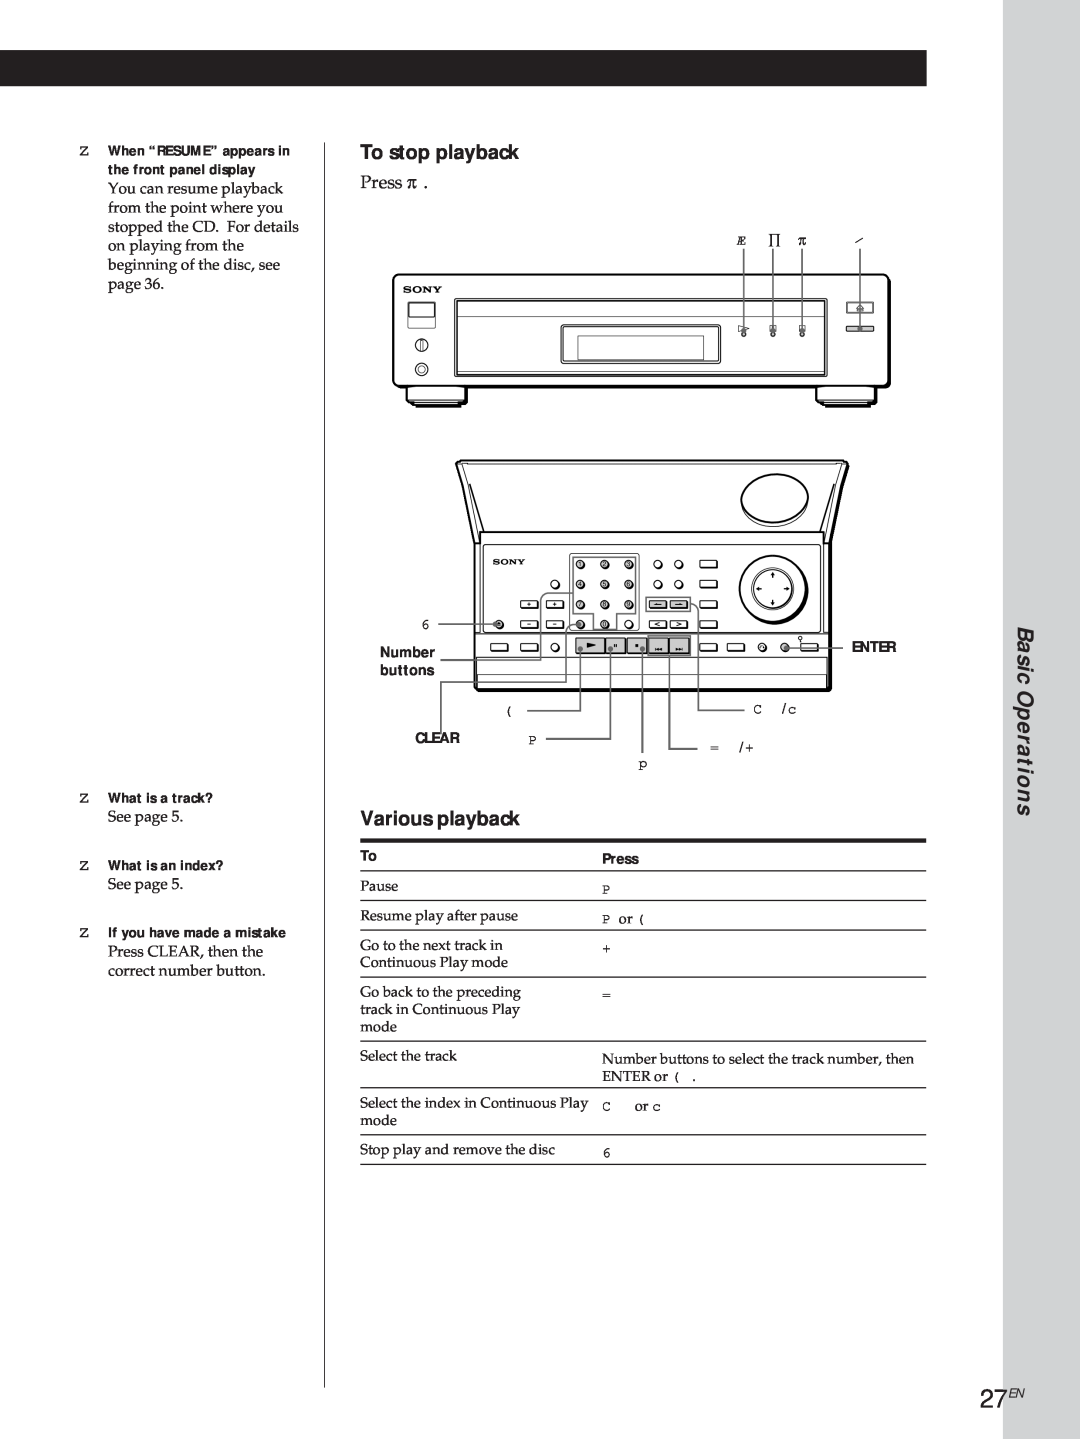 Sony DVP3980 manual 27EN, Basic Operations, To stop playback, Various playback, Press 